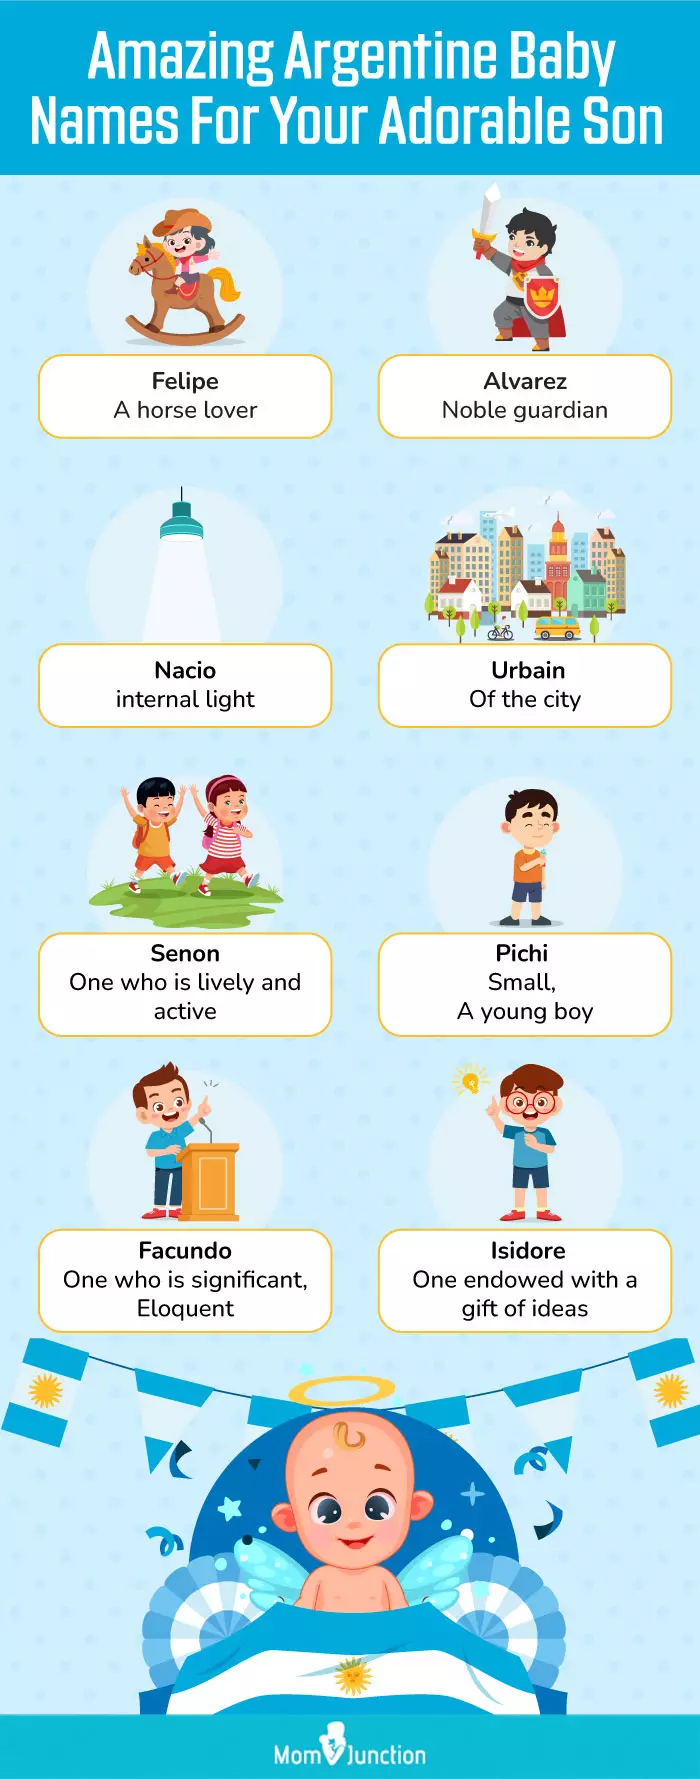 amazing argentine baby names for your adorable son (infographic)